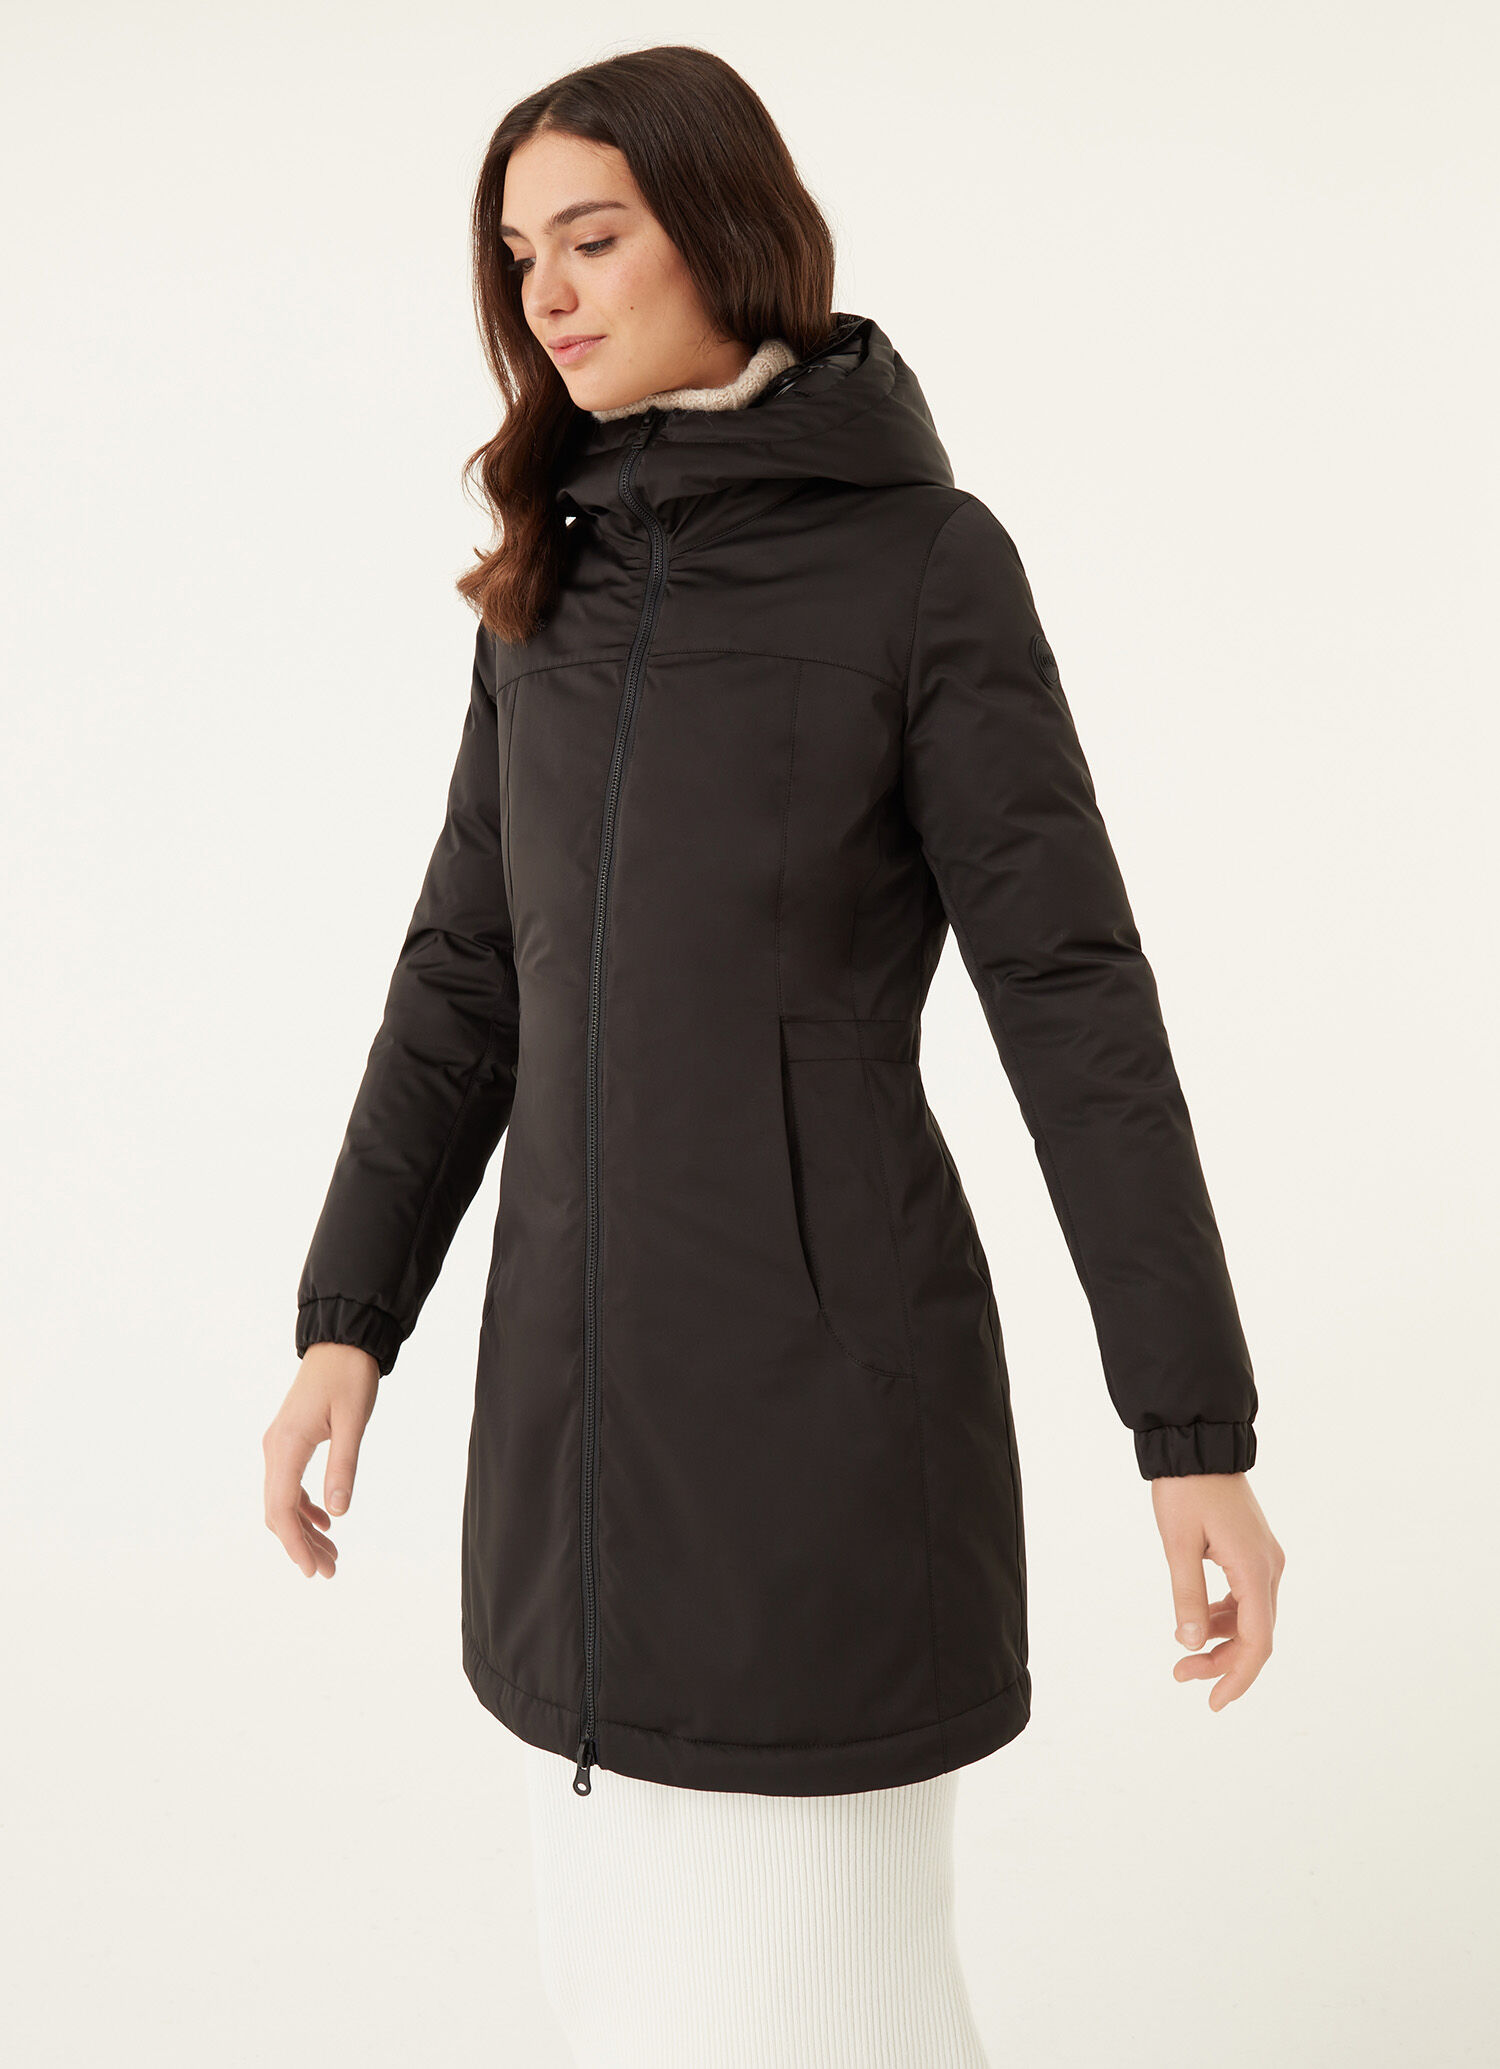 Colmar Recycled Essential - Giacca Invernale - Donna